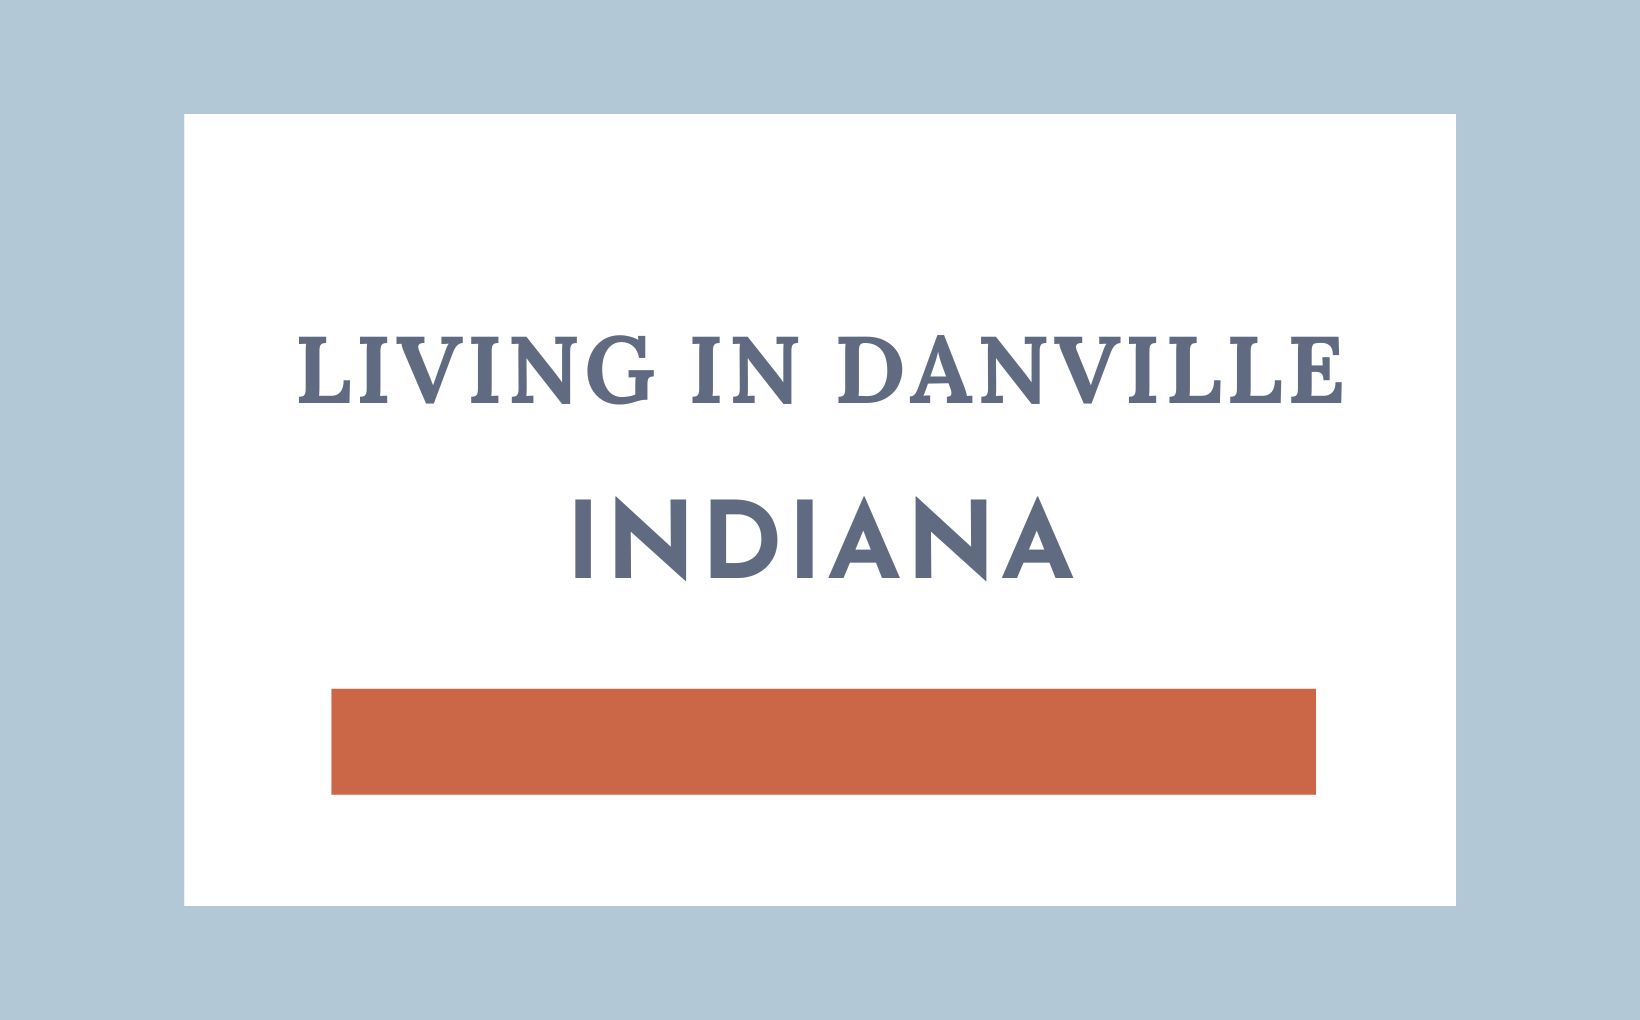 Living in Danville Indiana feature image